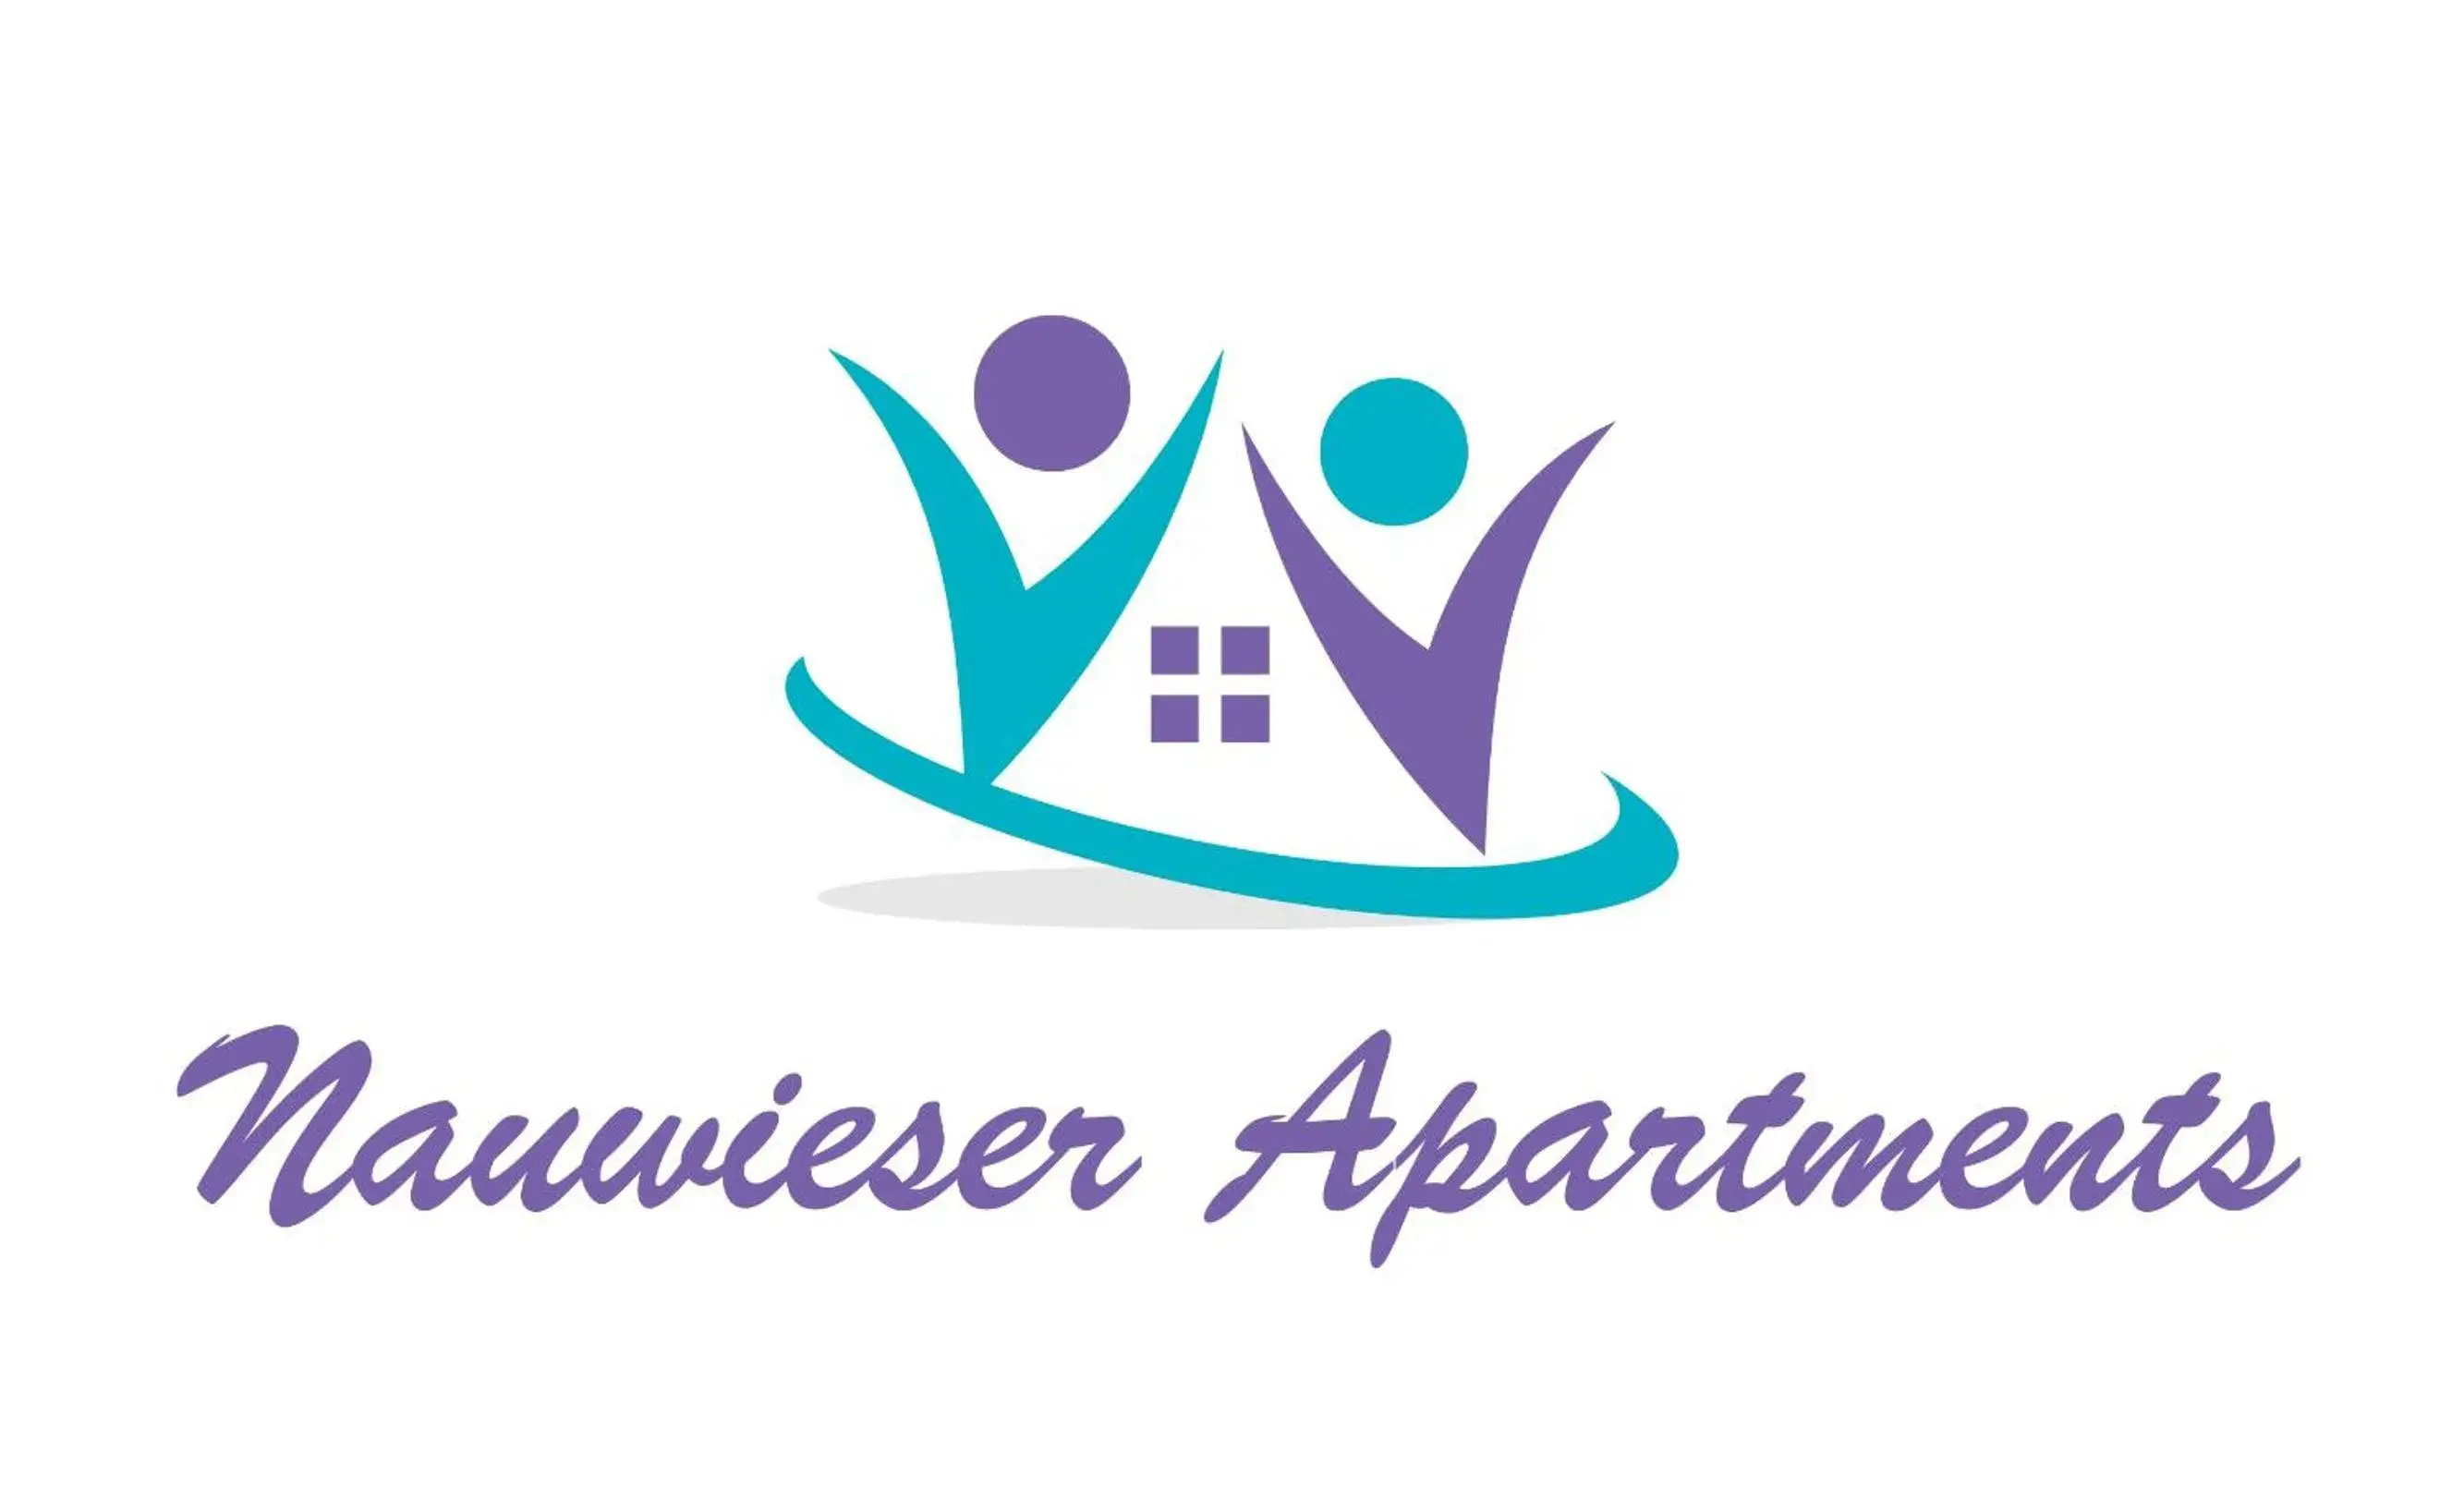 Property logo or sign in Nauwieser Apartments